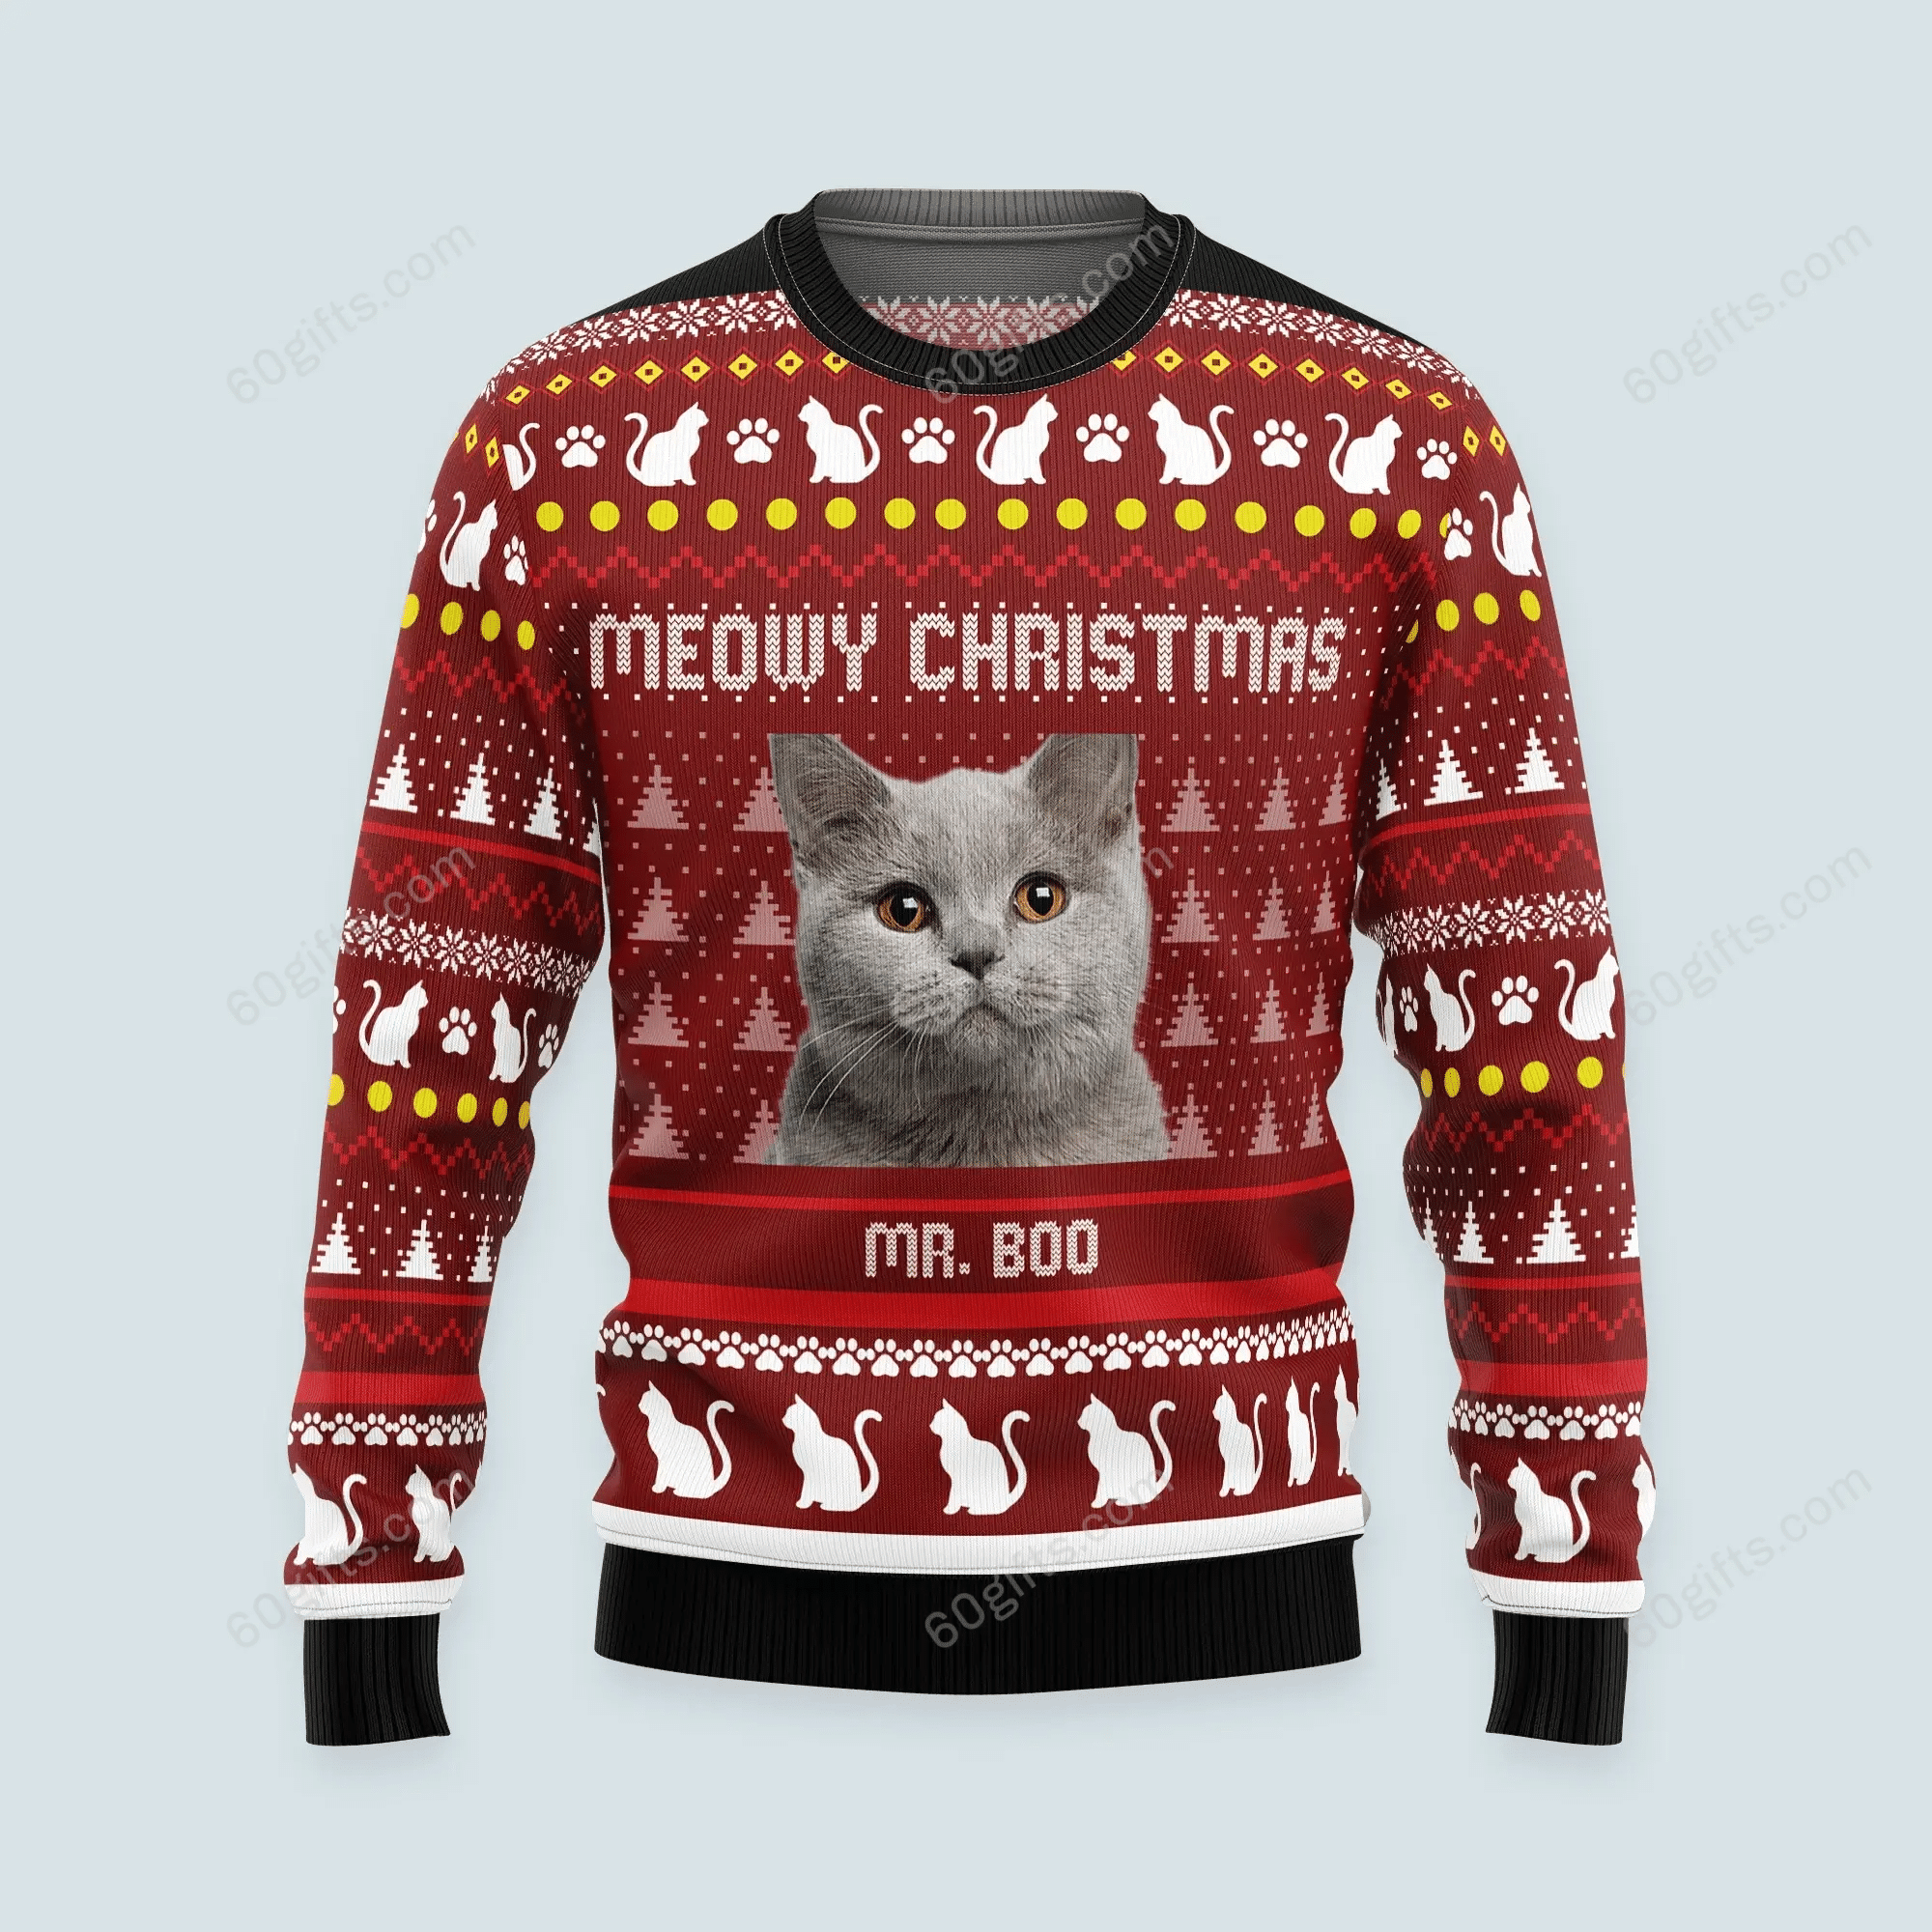 Merry Christmas & Happy New Year Custom 3d Ugly Christmas Sweatshirt Meowy Pet Lovers Personalized Aparel All Over Print